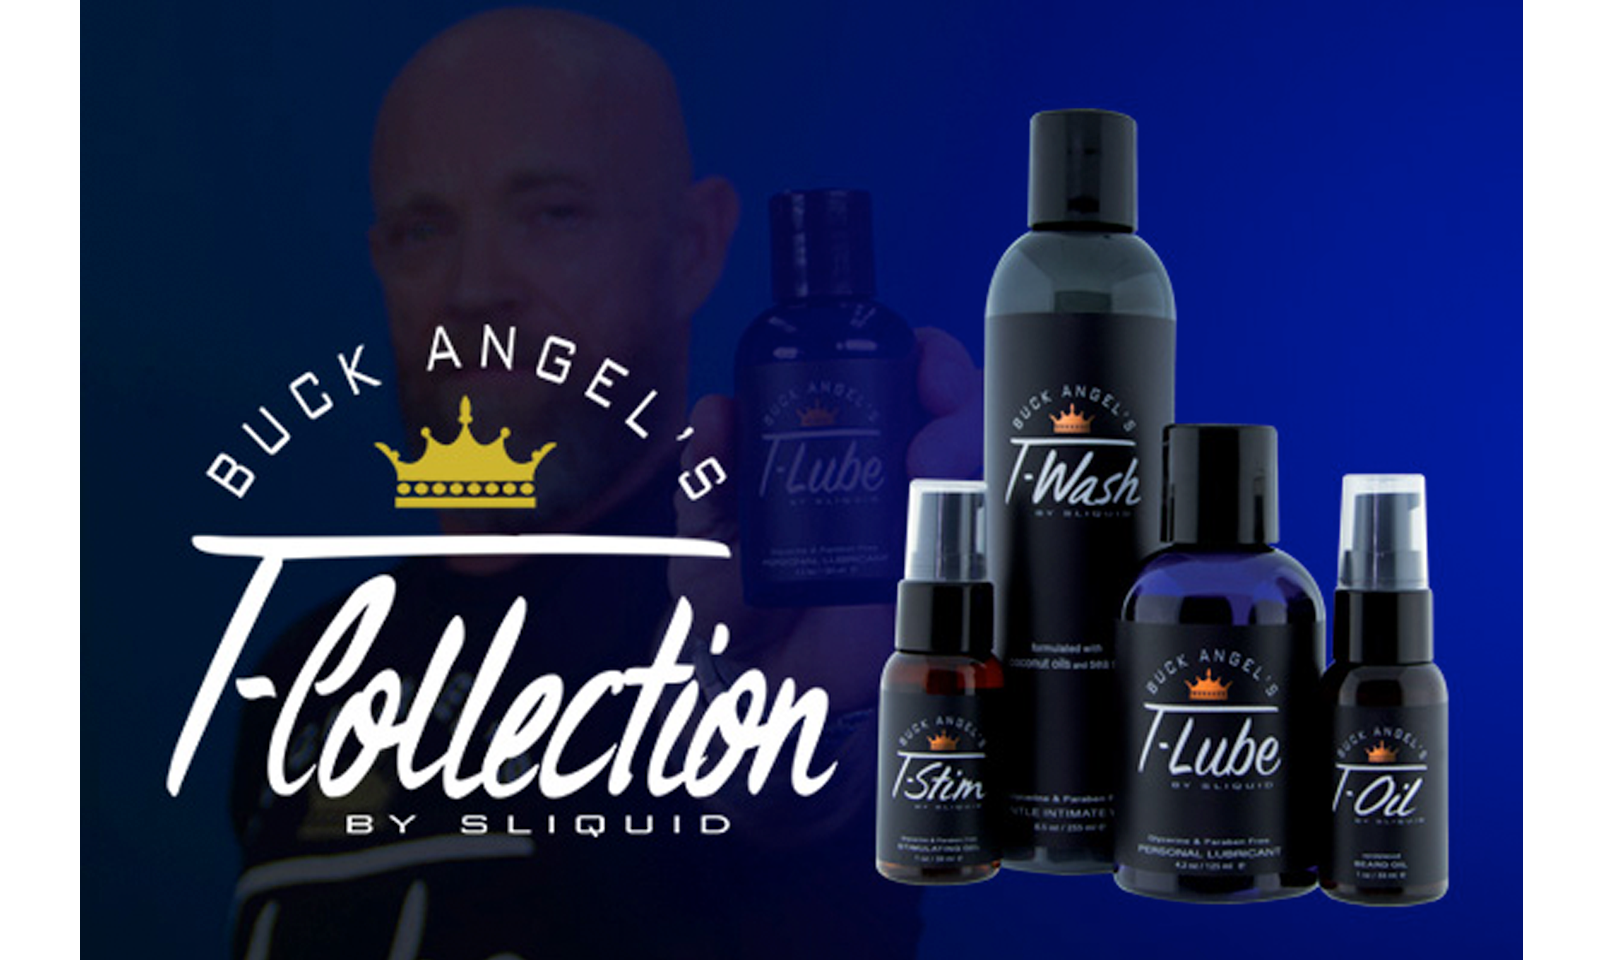 Buck Angel's T-Collection Bows from Sliquid